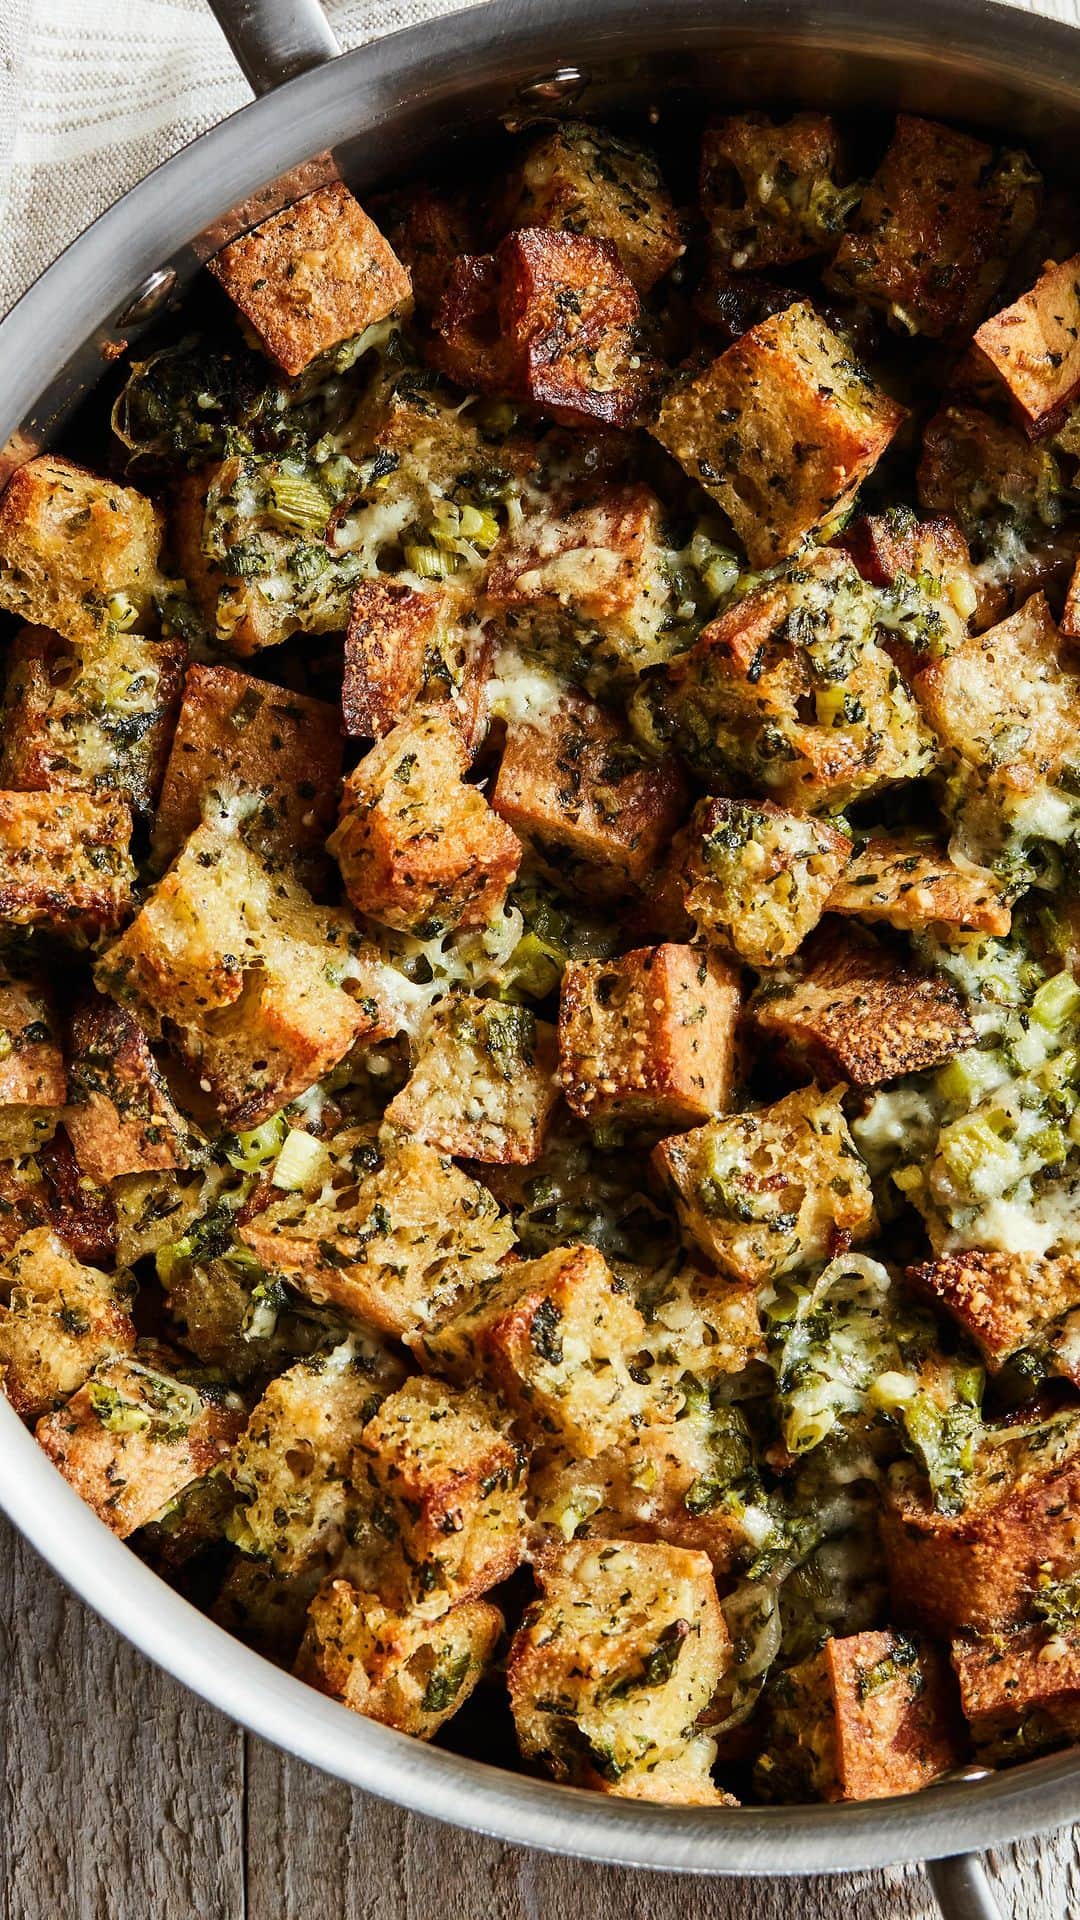 Gaby Dalkinのインスタグラム：「#ad This Thanksgiving, put a new spin on your classic stuffing recipe with my Ultimate Cheesy Herb Sourdough Stuffing 😋 for your ultimate Thanksgiving experience. For the clean-up, use @FinishDishwashing Ultimate Tabs to clean the burnt-on stains left behind on your dishes toughest conditions - plus, it works in hard water and in old dishwashers as well, even when you skip the rinse! Check out the link in my bio for the full recipe. #UltimateThanksgivingTimer https://ultimatethanksgivingexperience.com/」